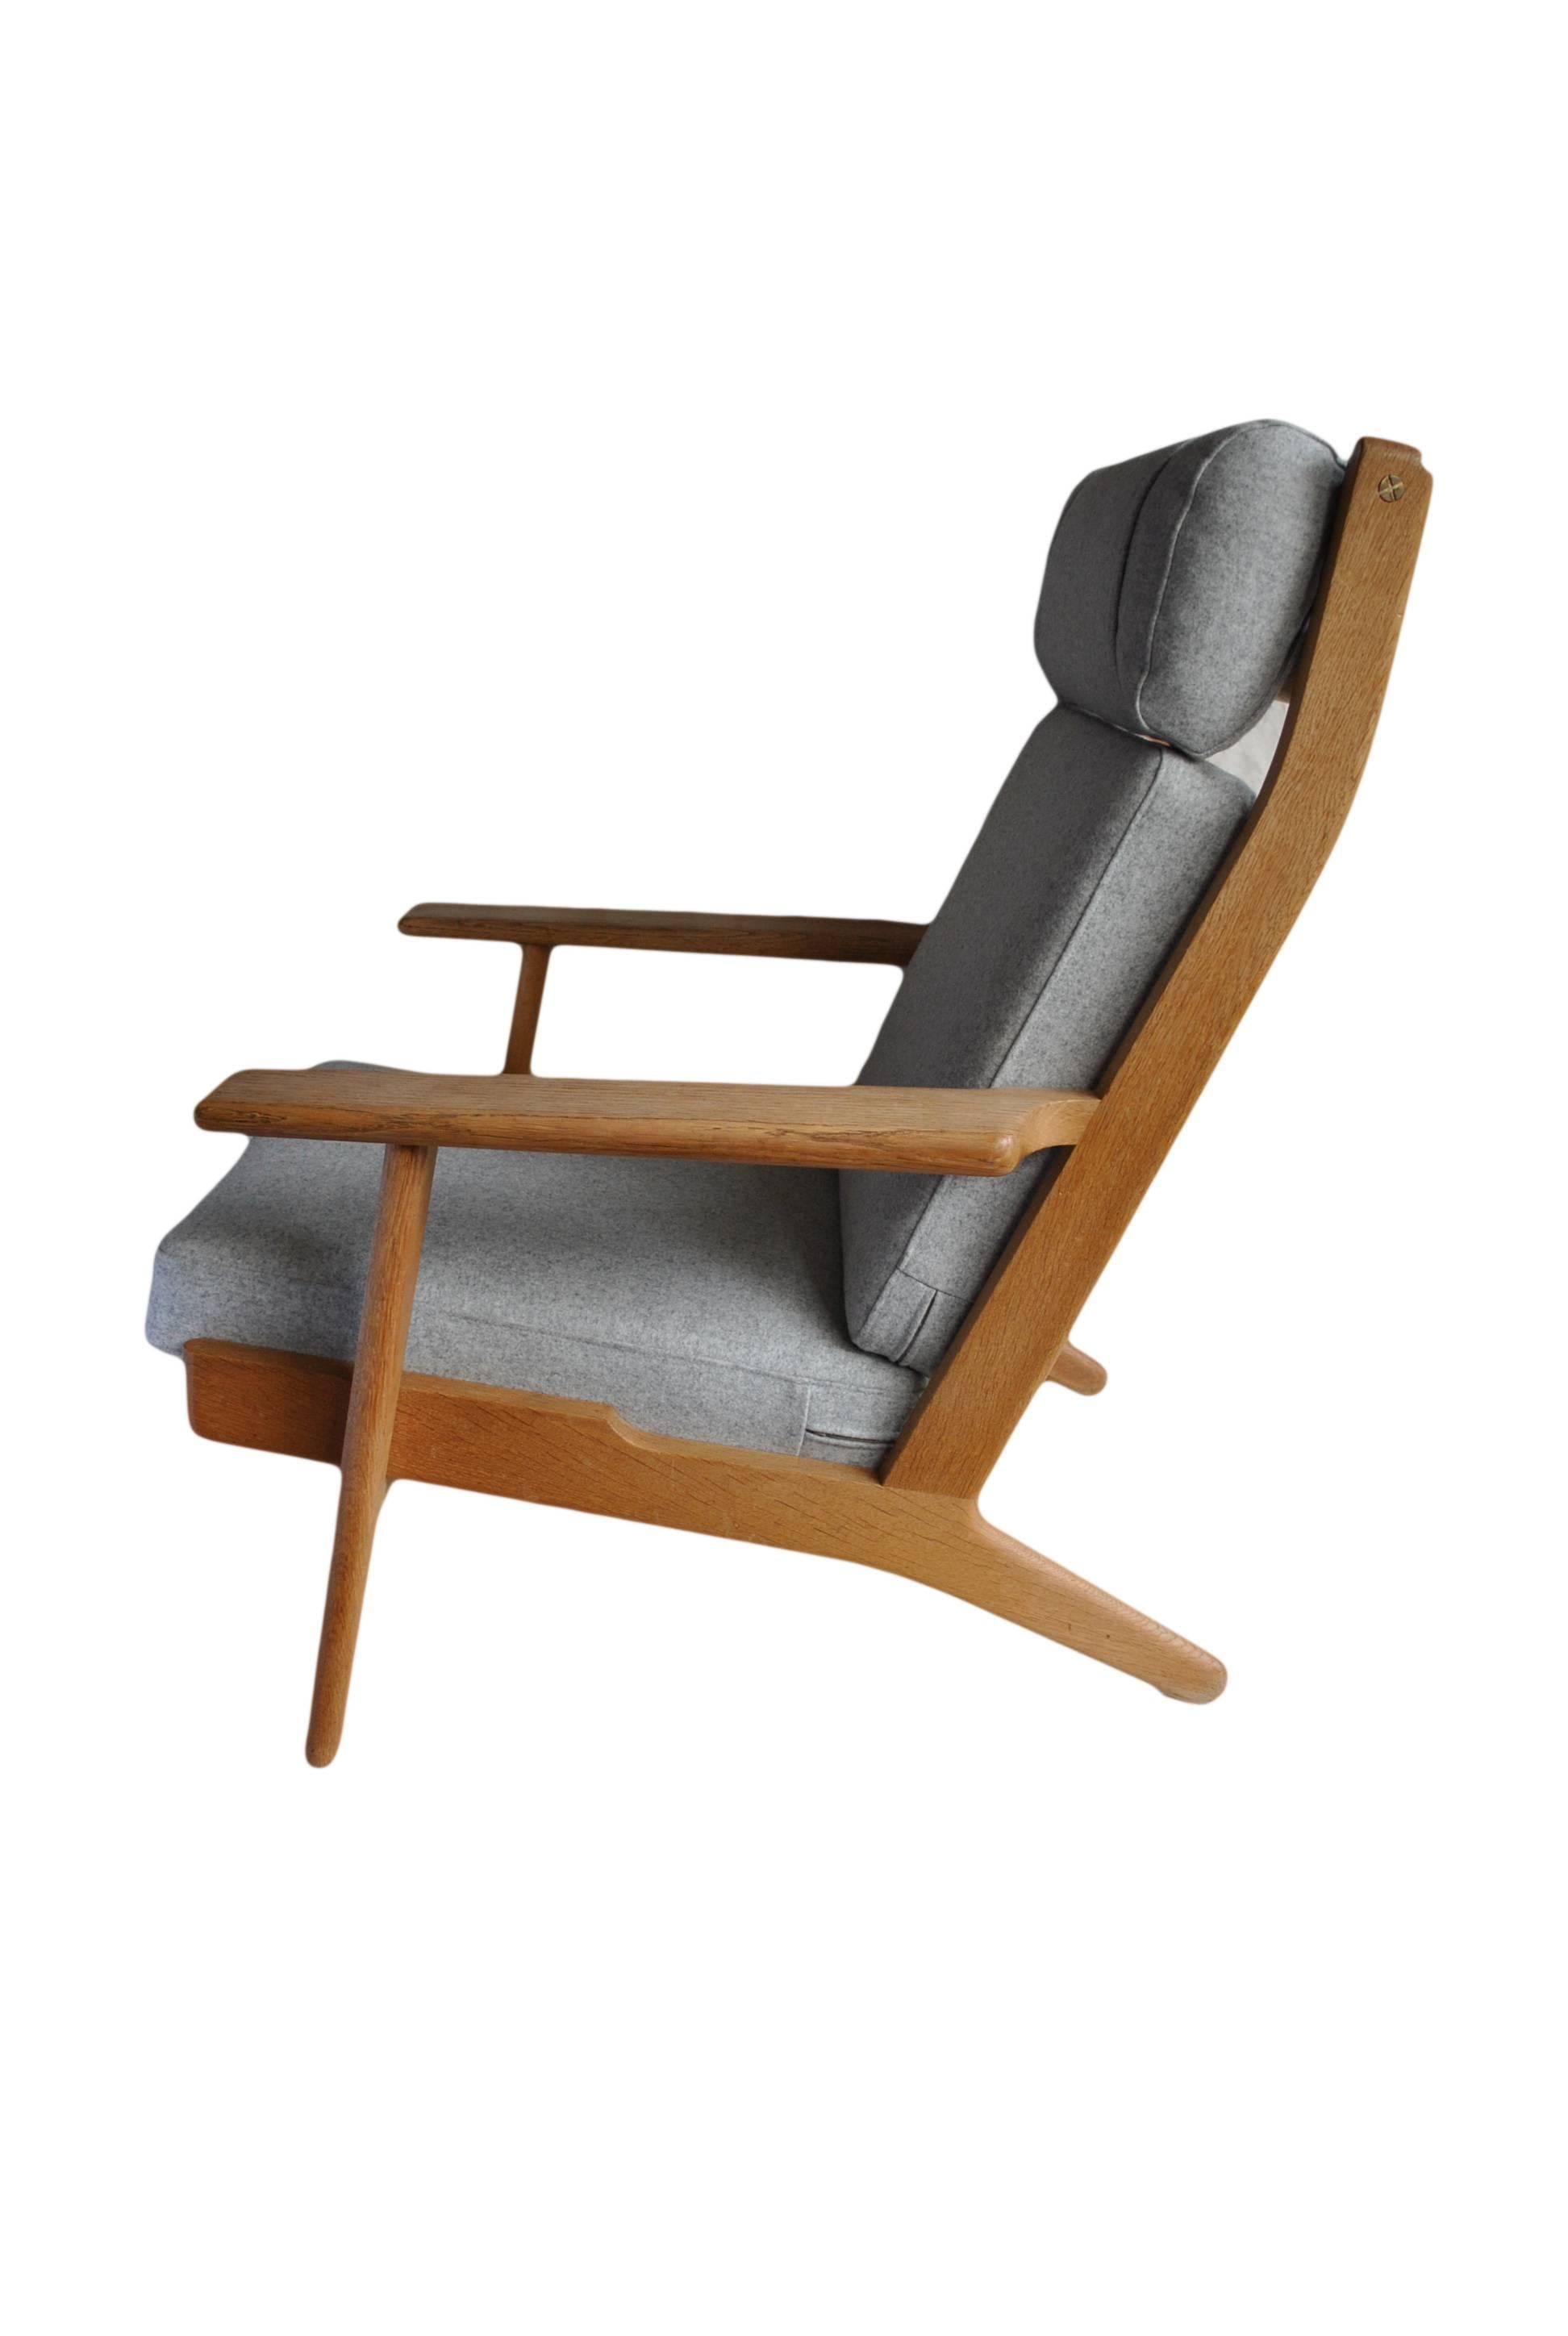 An original 1950s GETAMA GE290 high back lounge chair by Hans J Wegner. Freshly reupholstered metal sprung cushions in grey felt. Repolished solid light European oak frame - in superb condition throughout. Makers/designers marks still intact to